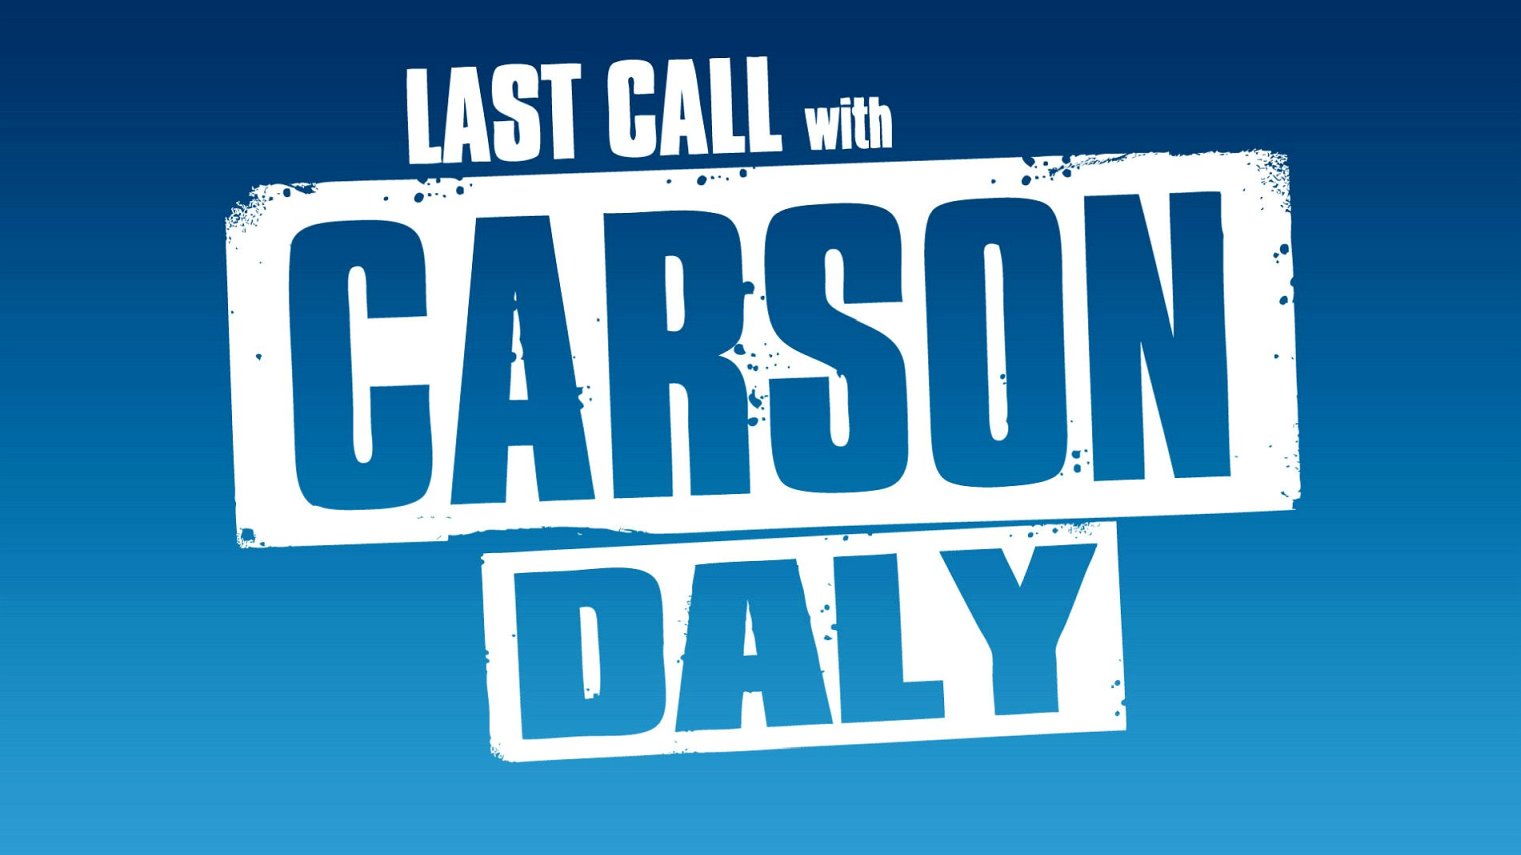 cast of Last Call with Carson Daly season 16